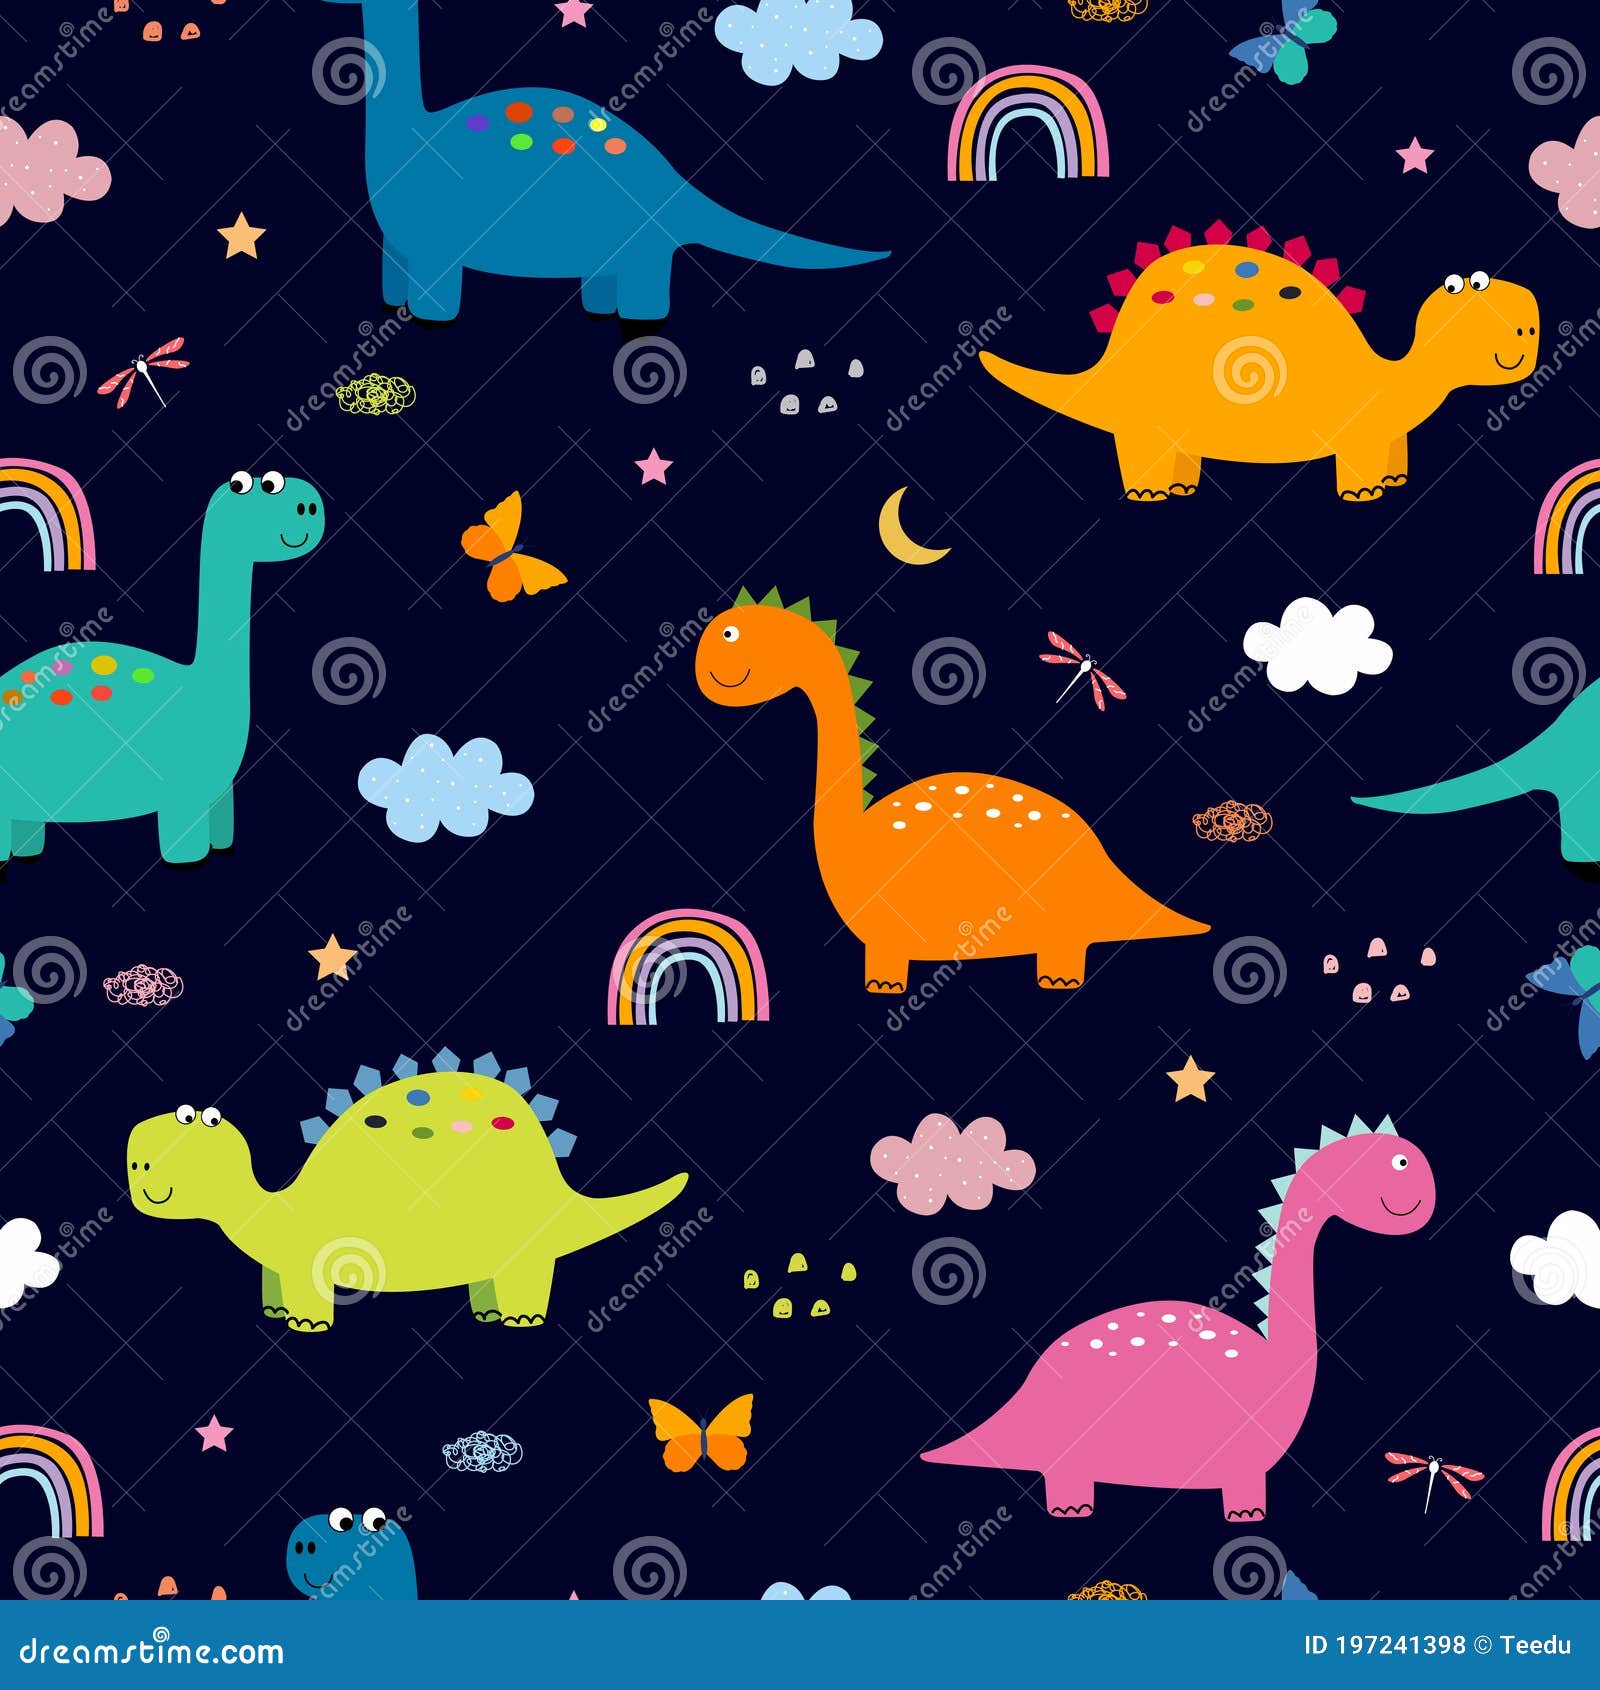 Dinosaurs and Clouds in the Sky Seamless Pattern Cute Cartoon Animal  Background Stock Vector - Illustration of character, cloud: 197241398